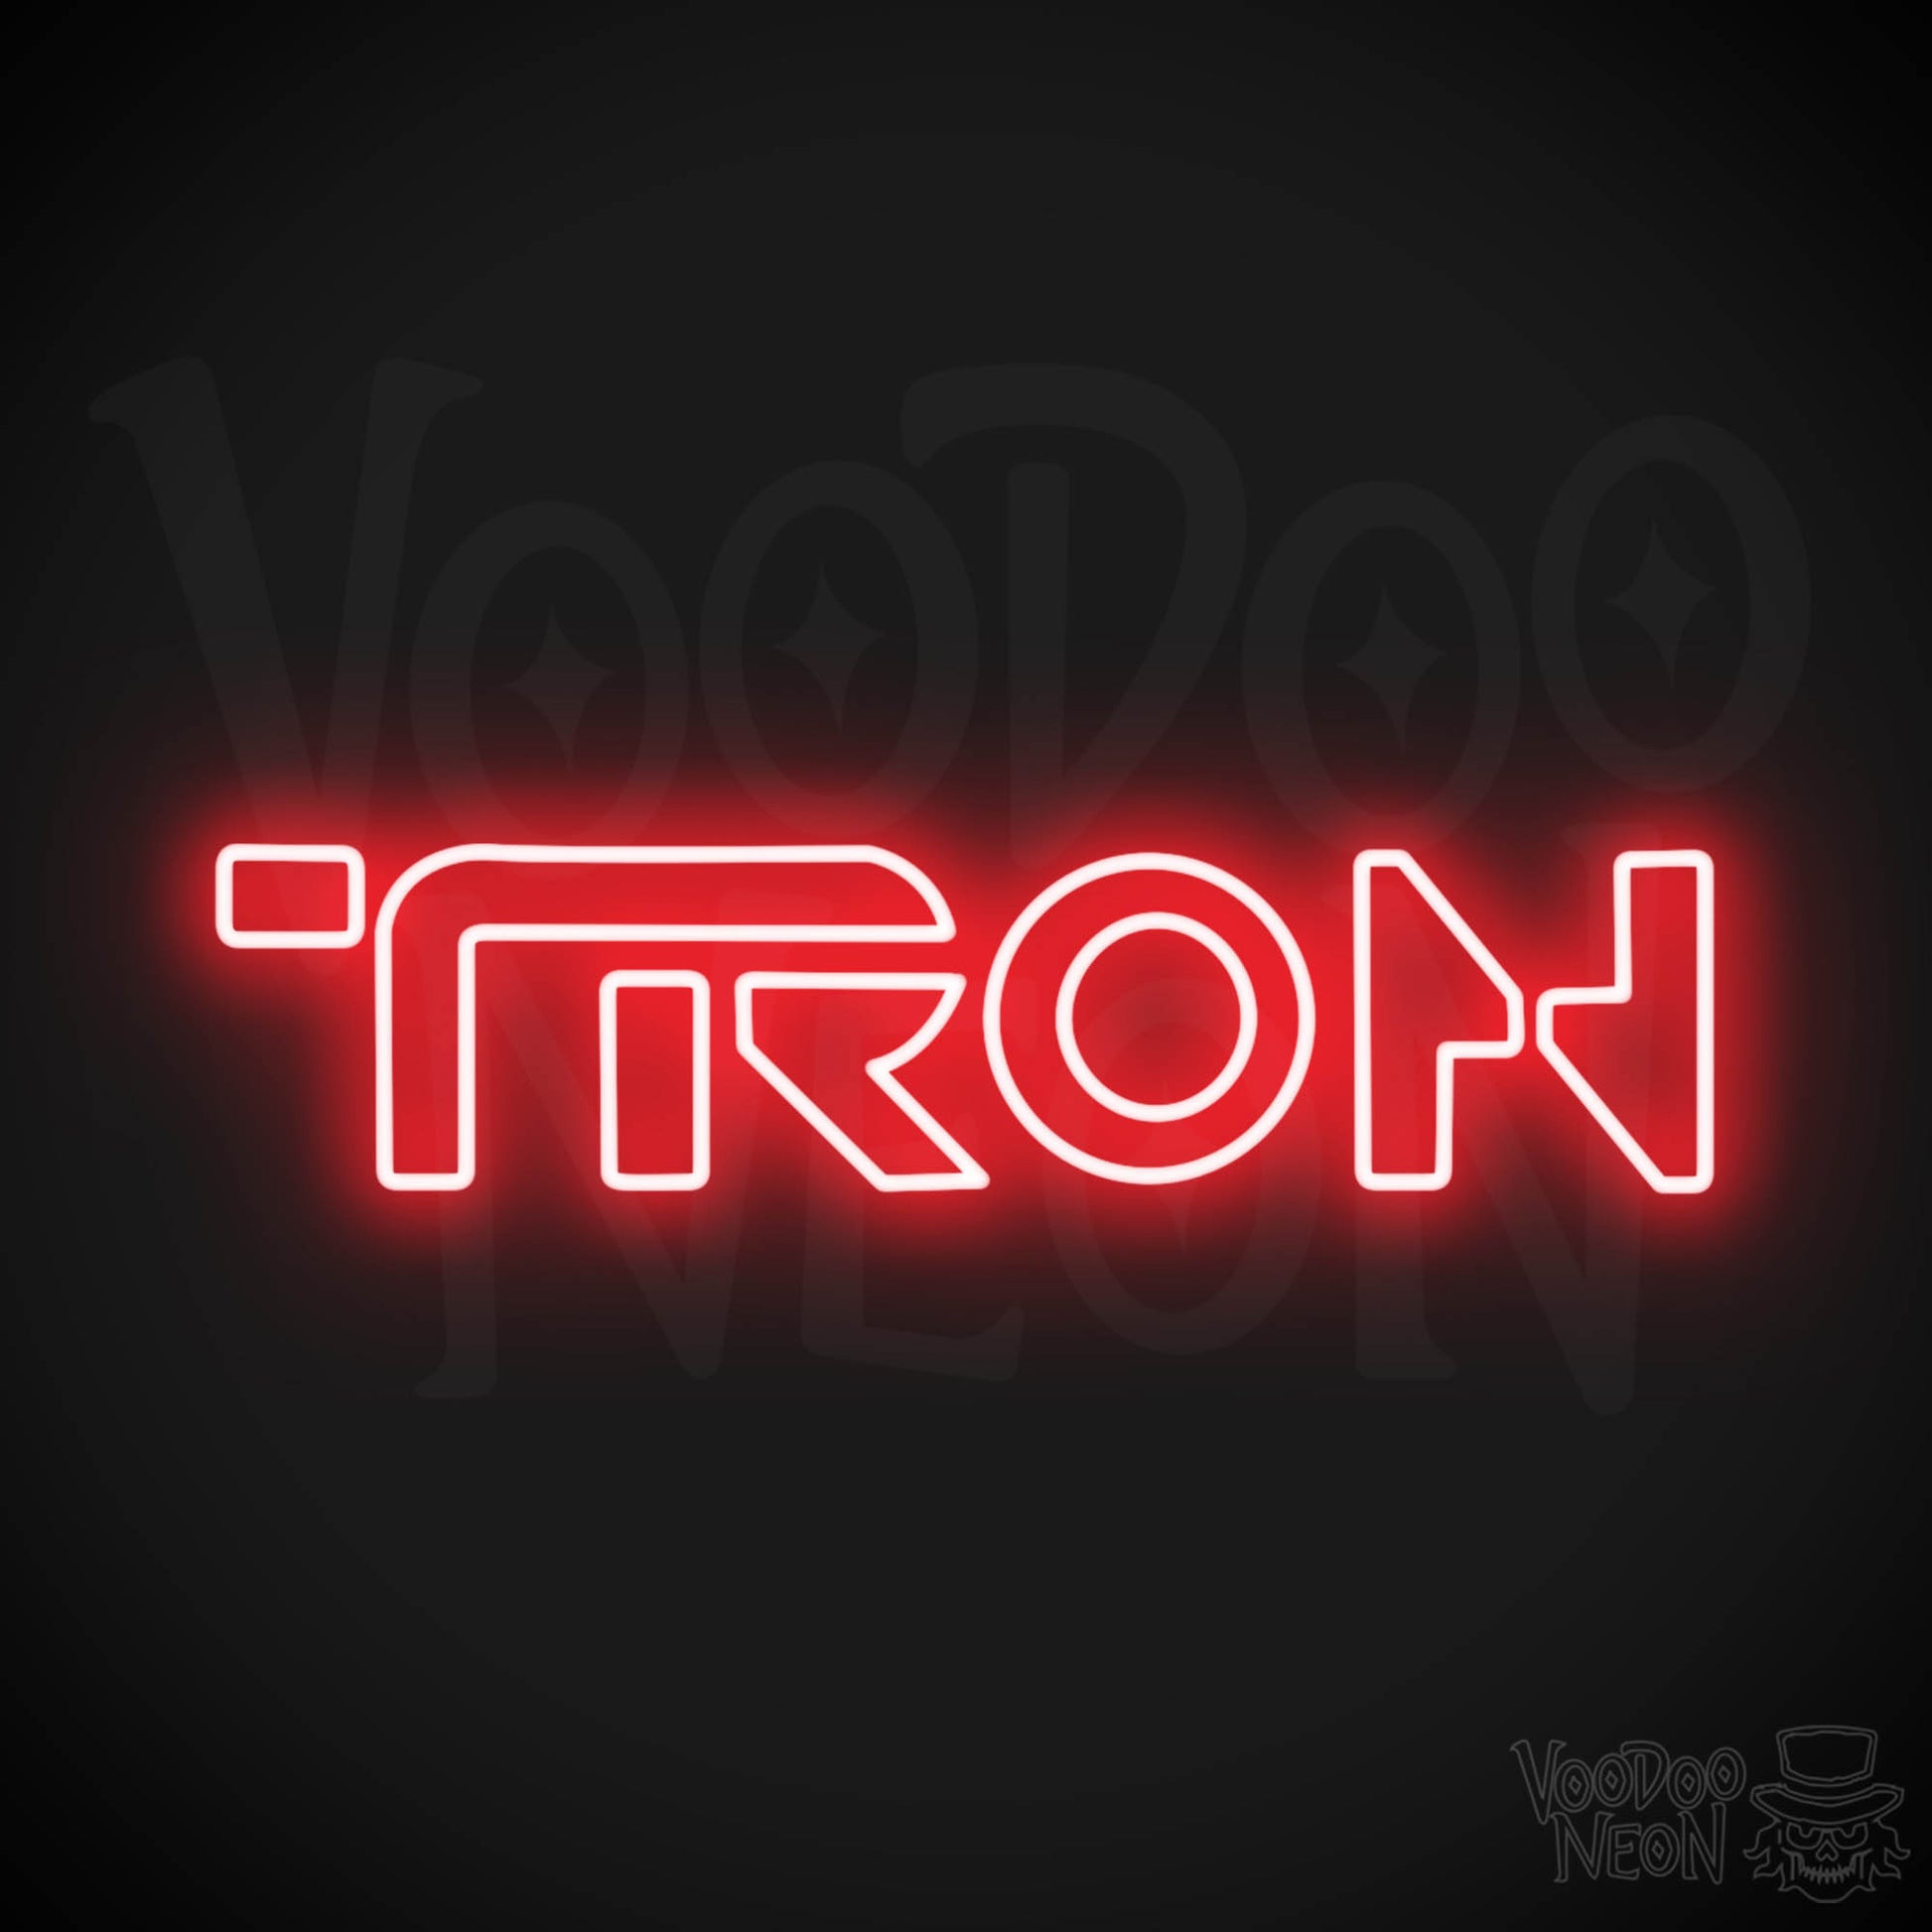 Tron Neon Sign - Neon Tron Sign - Movie LED Wall Art - Color Red